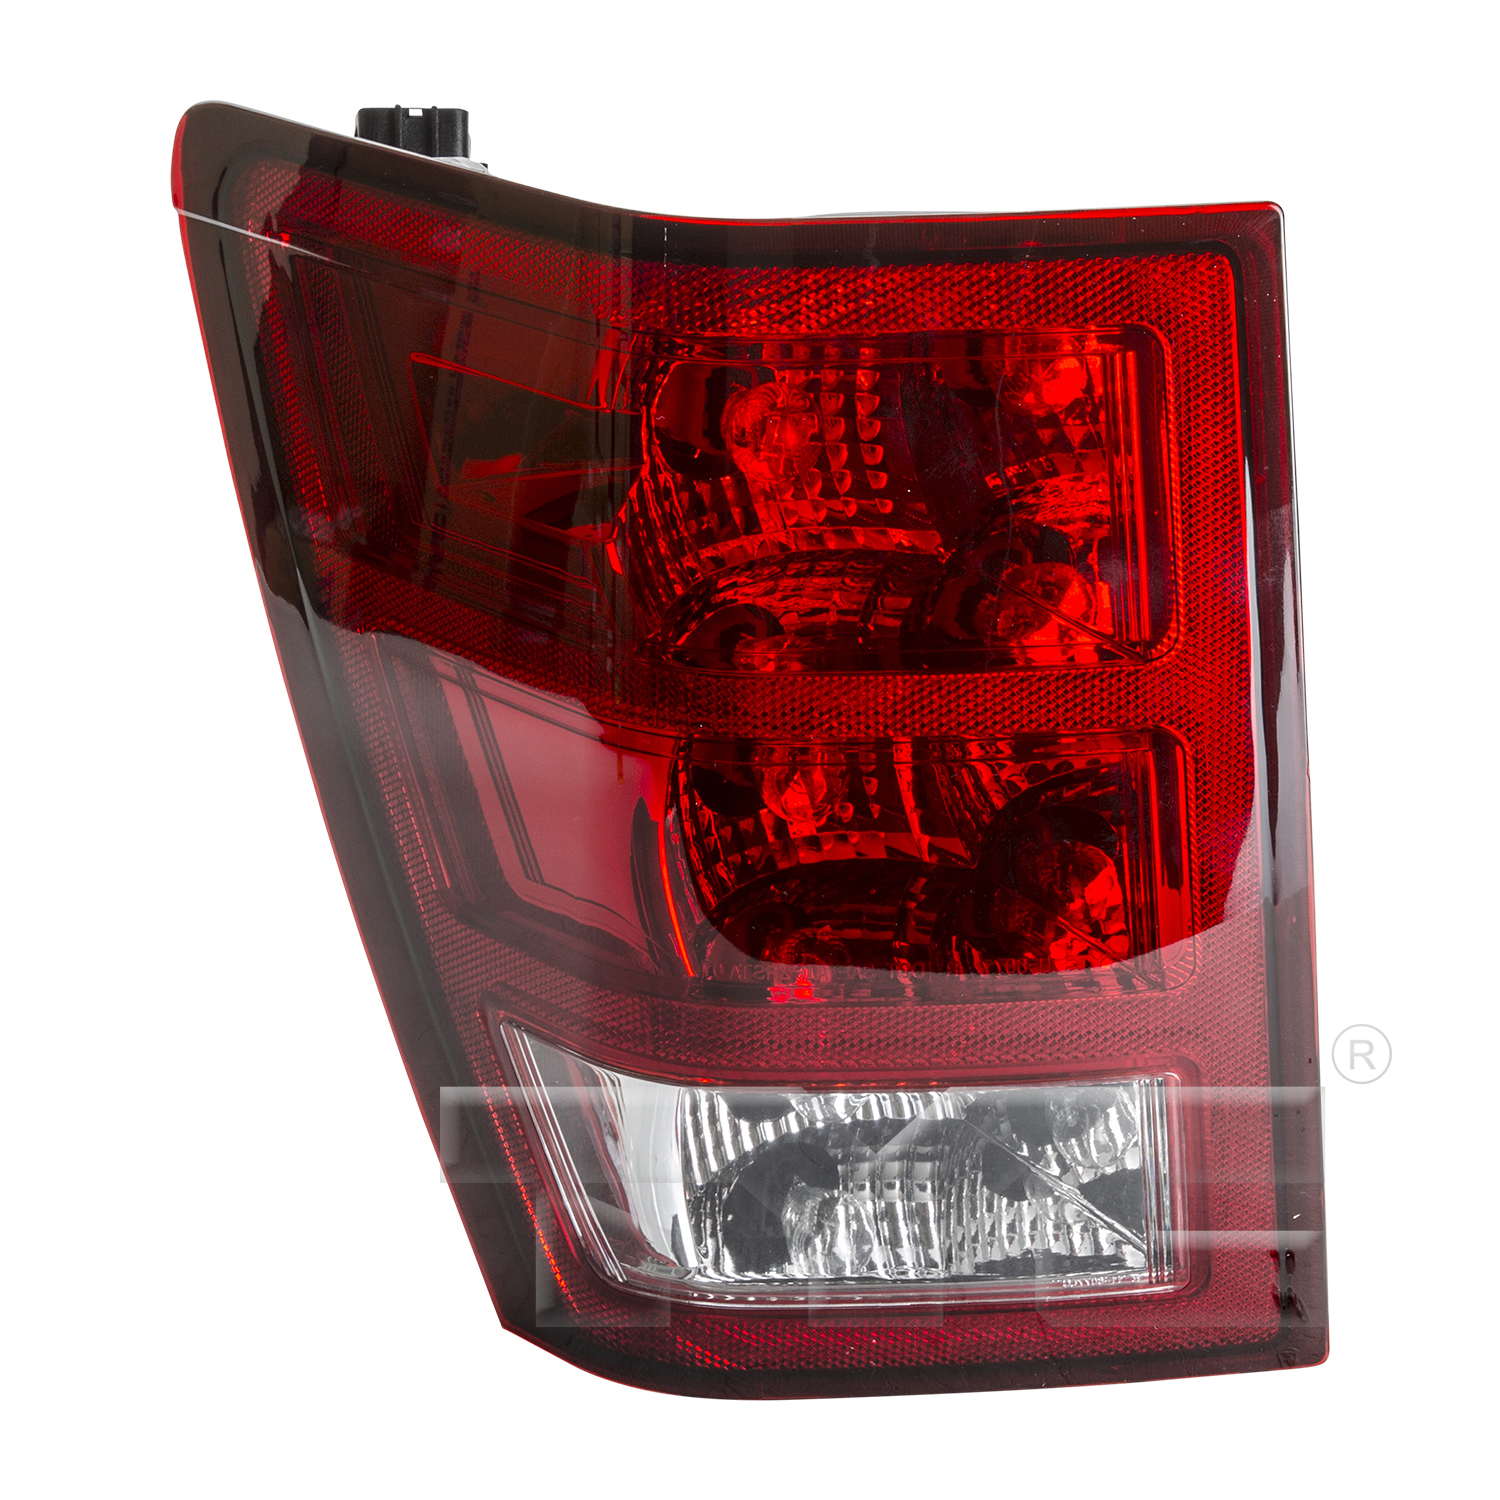 Aftermarket TAILLIGHTS for JEEP - GRAND CHEROKEE, GRAND CHEROKEE,05-06,LT Taillamp assy